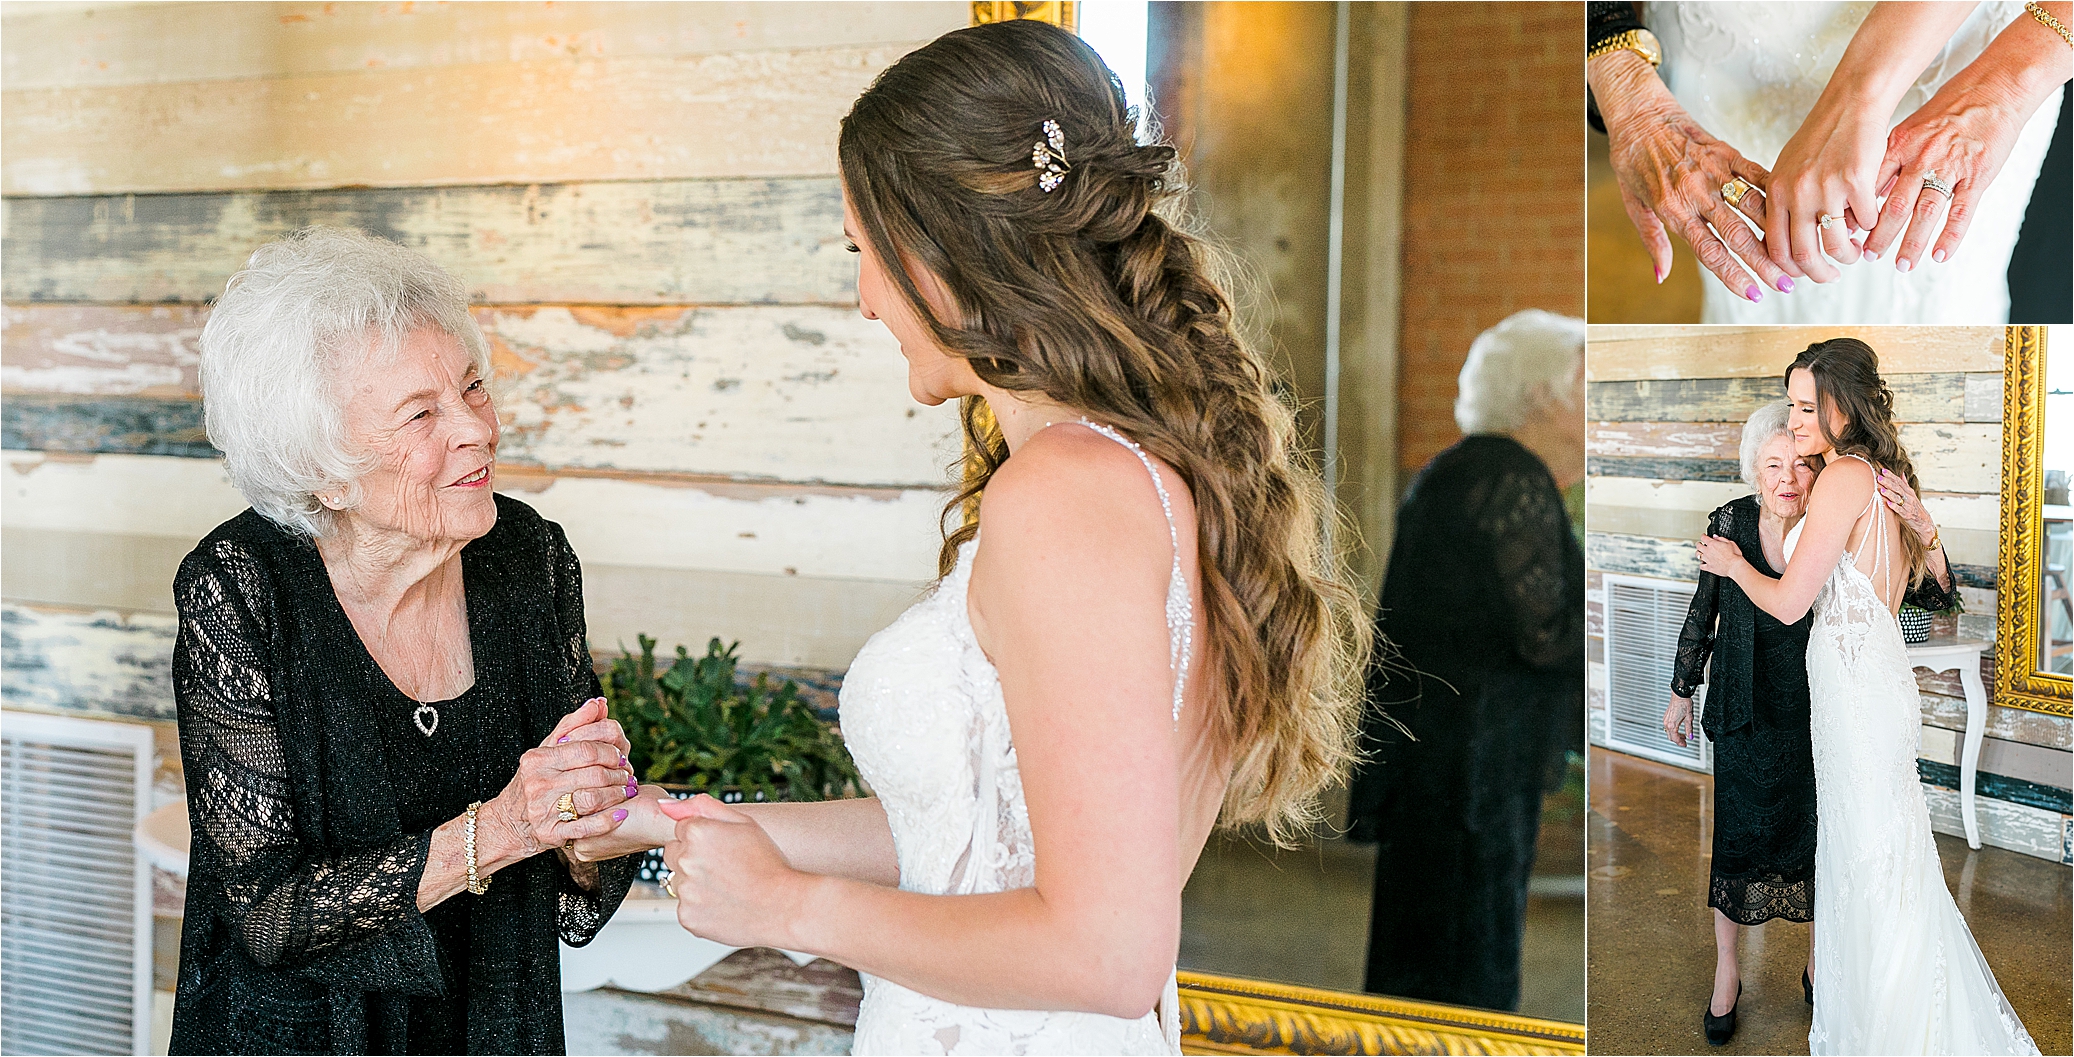 A bride and her grandmother share an intimate moment before she walks down the aisle at Hickory Street Annex in Dallas, TX 